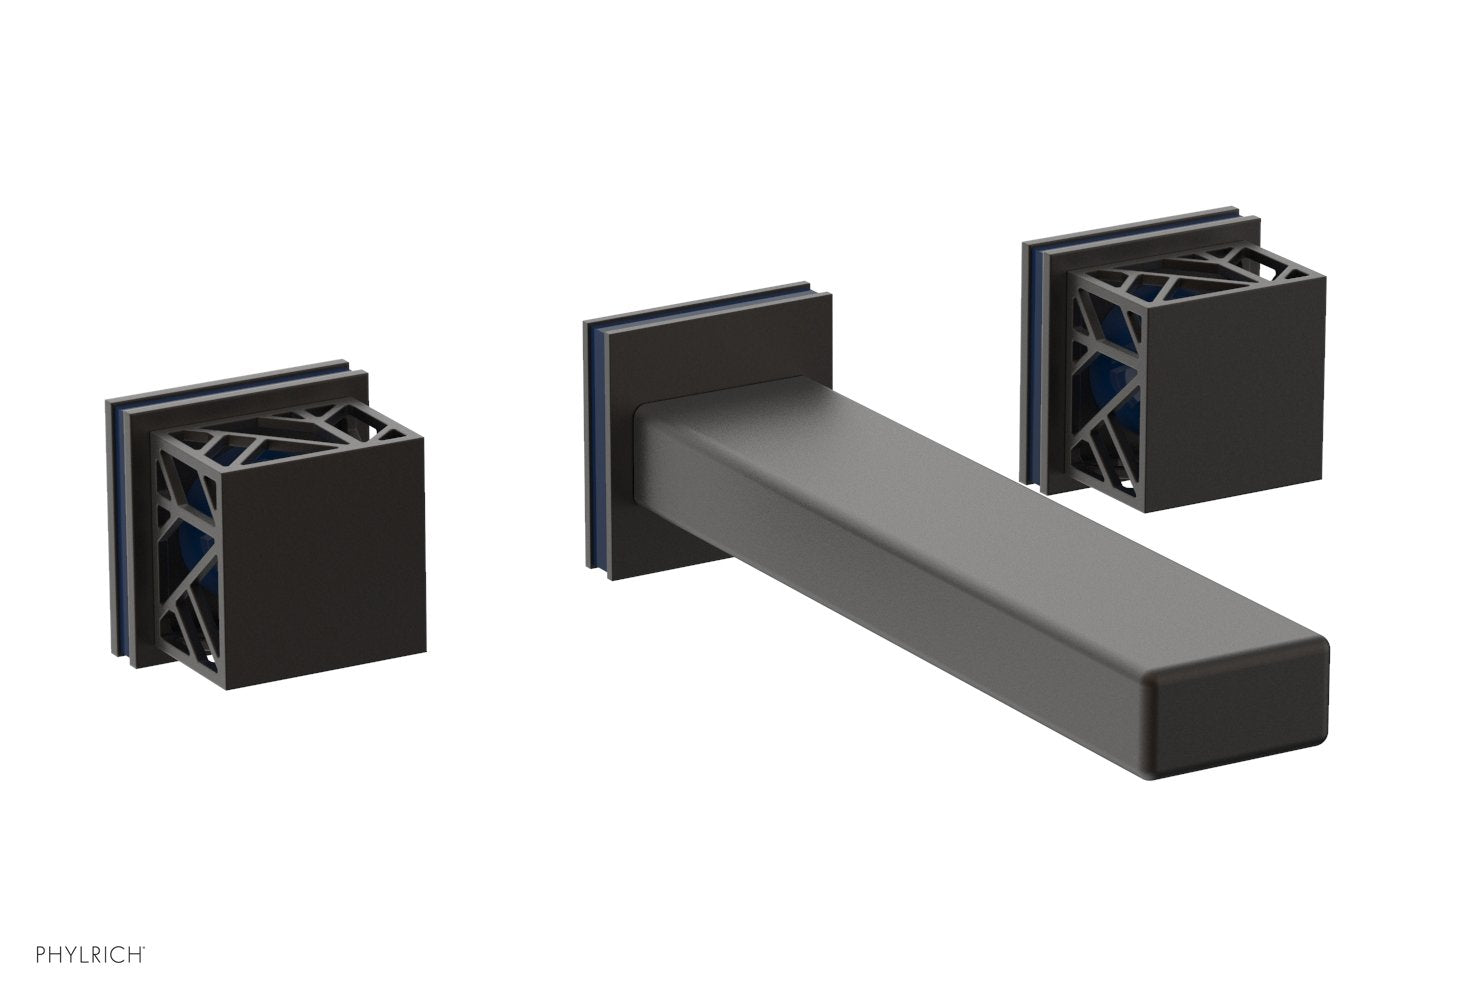 Phylrich JOLIE Wall Tub Set - Square Handles with "Navy Blue" Accents